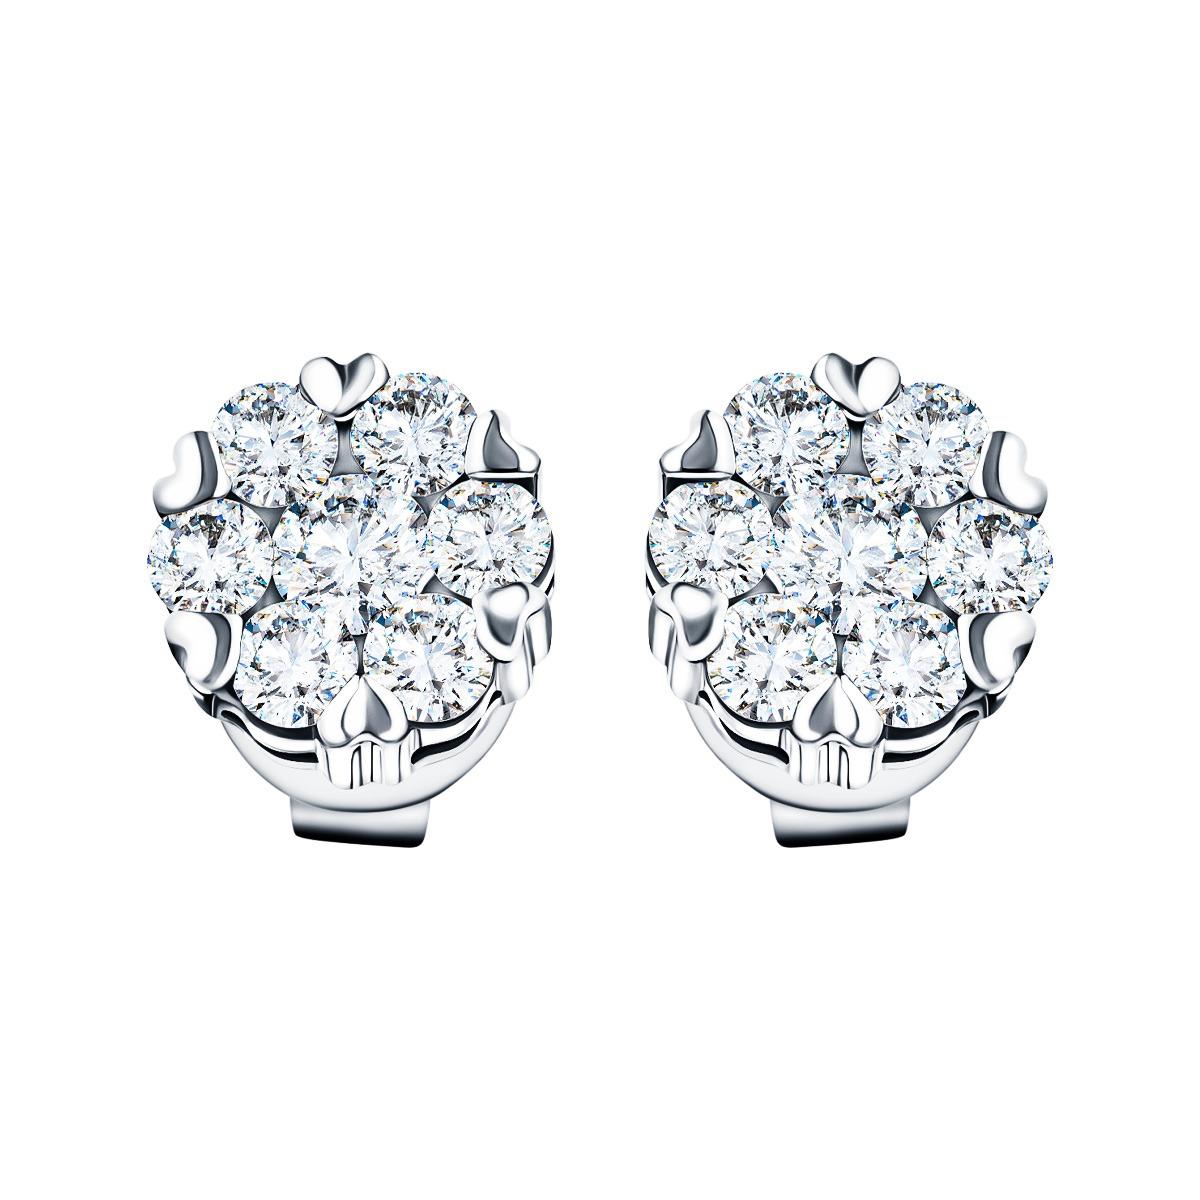 Elegant and eye catching 0.25 Carat Mini Daisy Cluster earrings set with white colour G/H and an eye clean clarity SI round brilliant cut diamonds made with 18 Karat White Gold. Available in yellow and rose gold on request. British